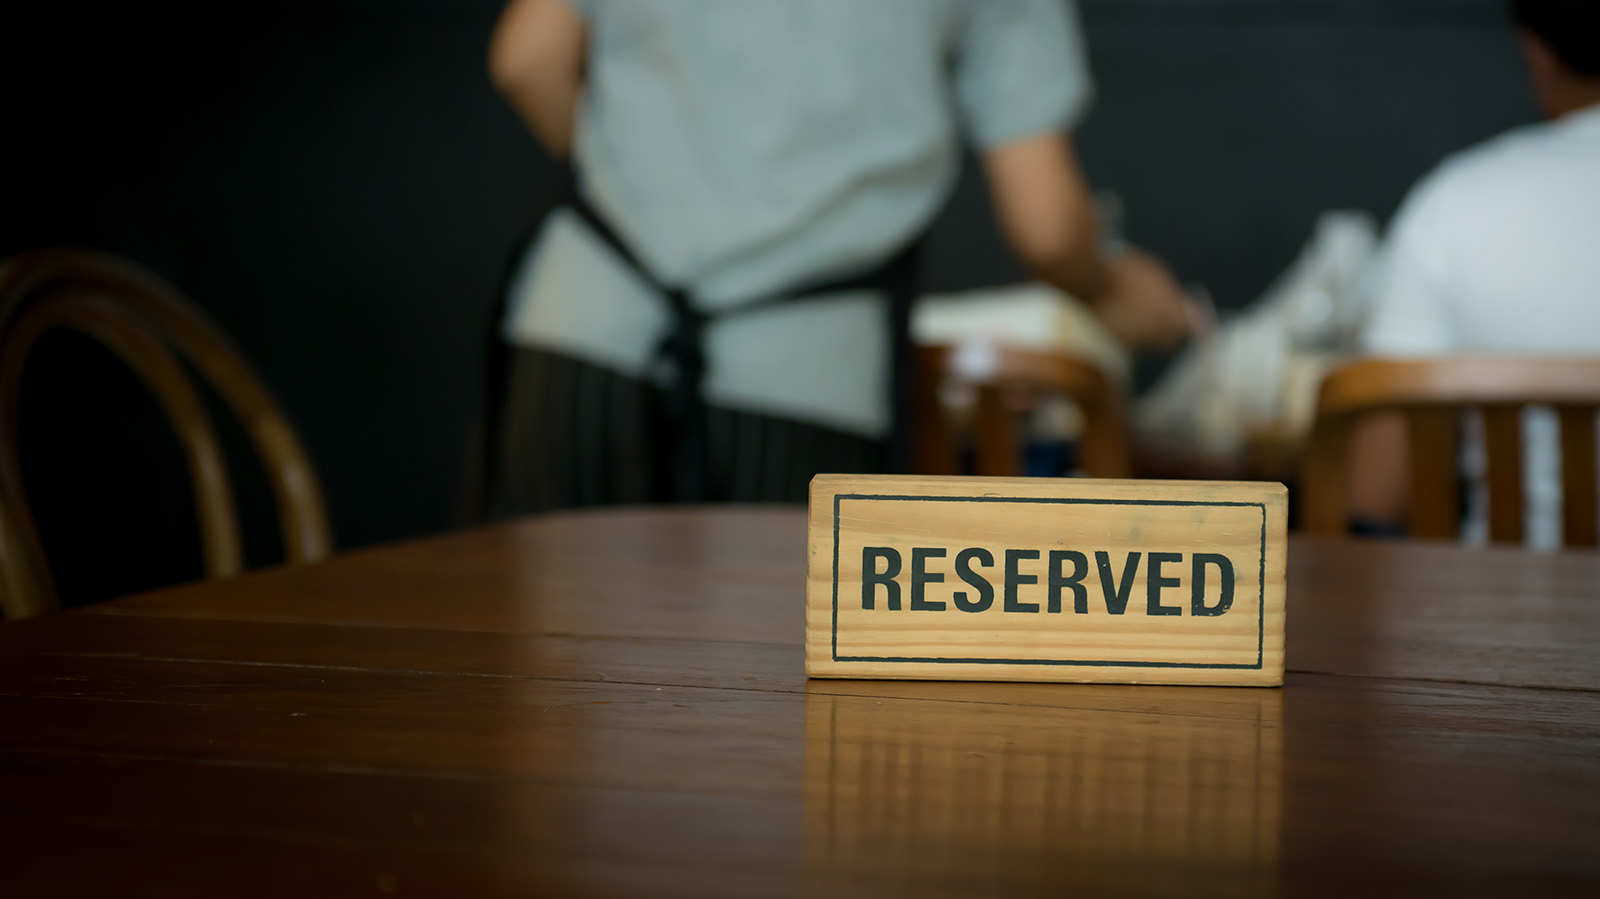 No-shows, late cancellations – why it’s time for us to rethink reservation etiquette